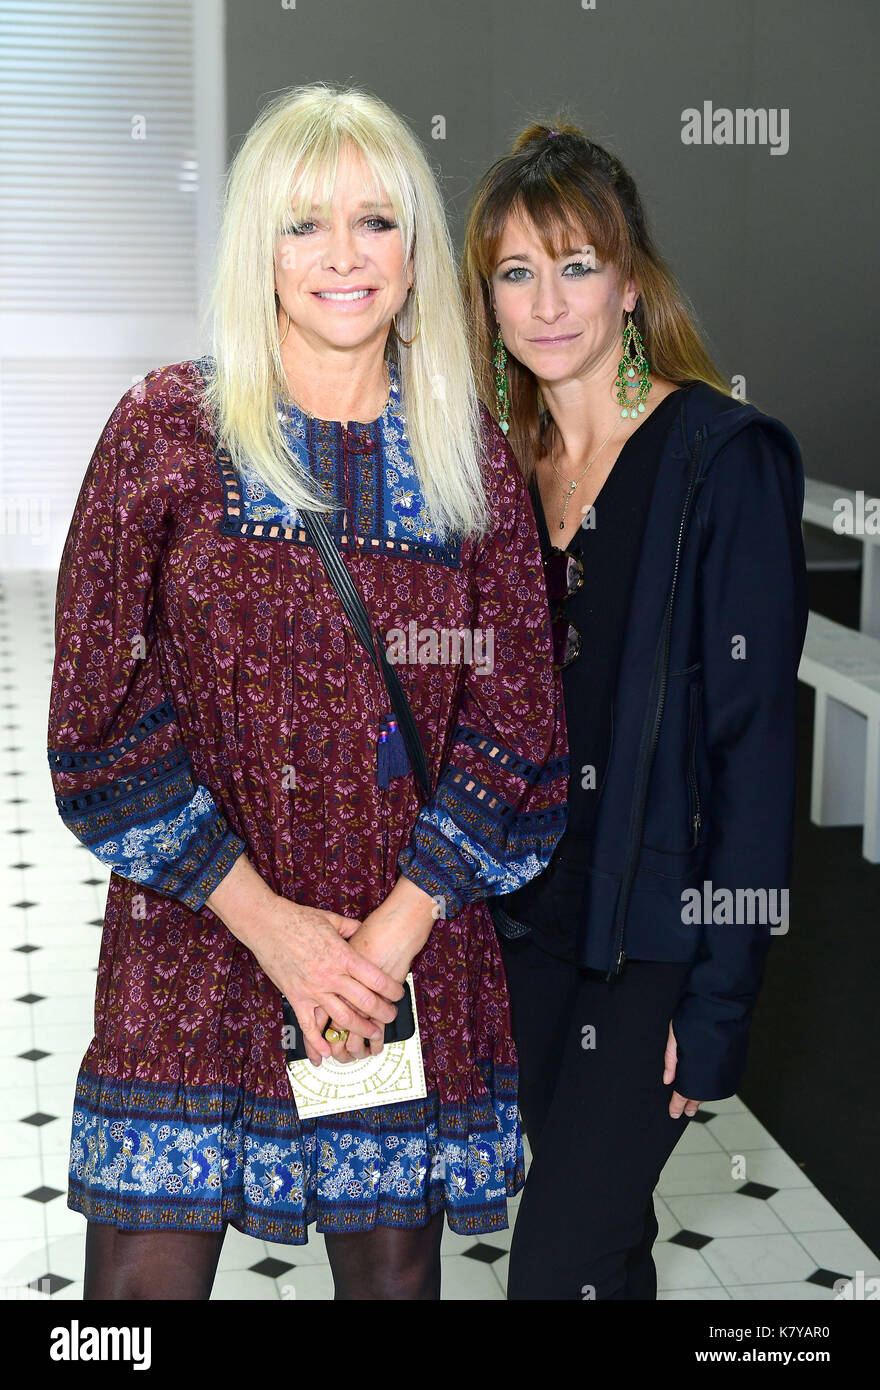 Jo and Leah Wood on the front row during the Temperley London Fashion Week SS18 show held at Lindley Hall, London. Stock Photo